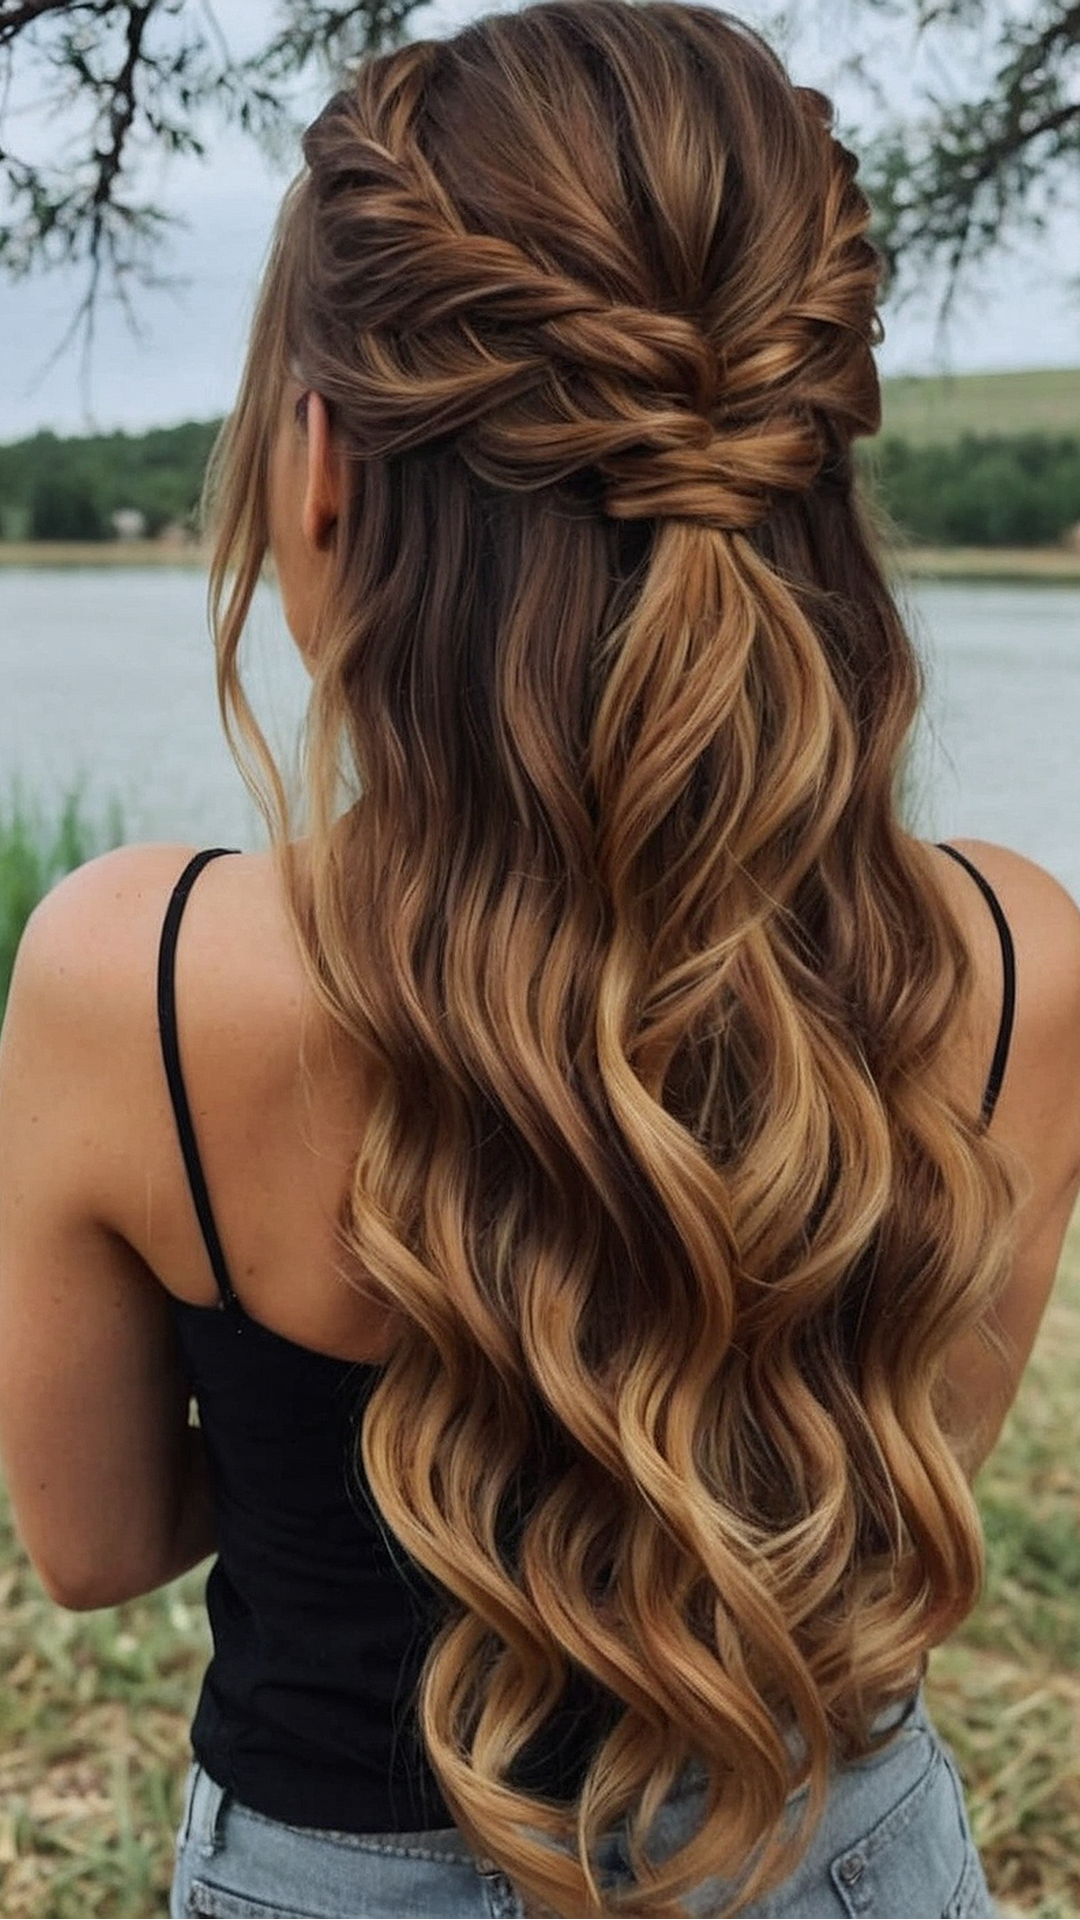 Chic and Trendy: The Latest Ladies' Cute Hairstyles